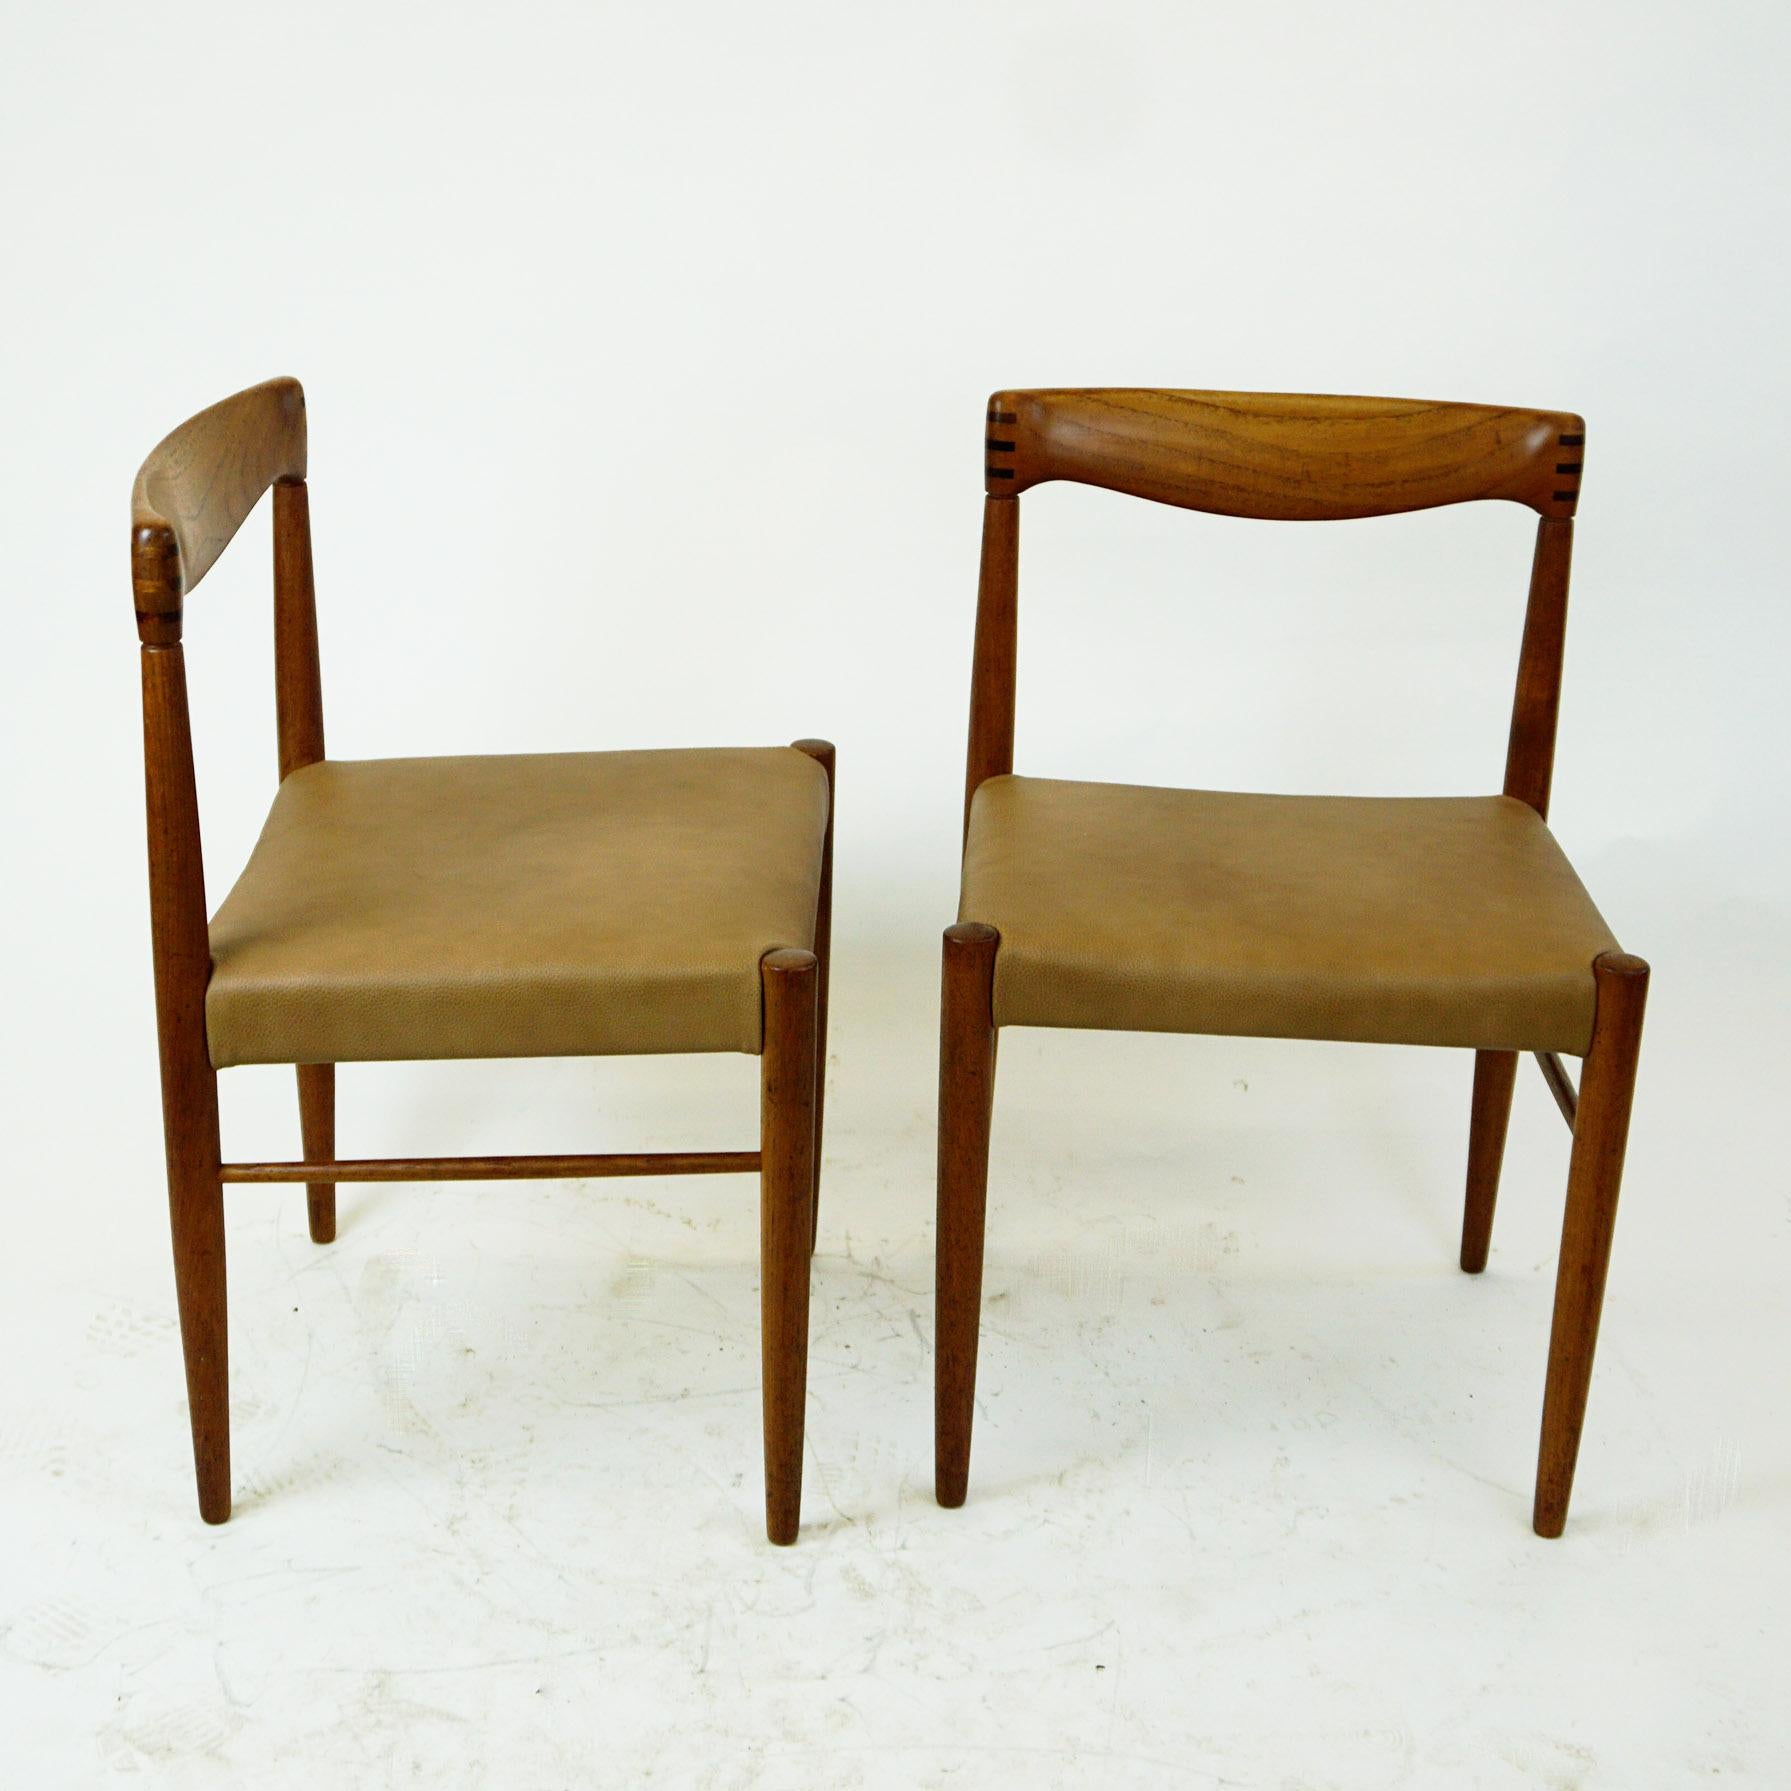 Rare and original Scandinavian midcentury dining chairs designed by Henry Walter Klein for Bramin Mobler Denmark in the 1960s. The frame is made from solid teak with renewed Leather seats and beautiful handcrafted details!
These chairs will be